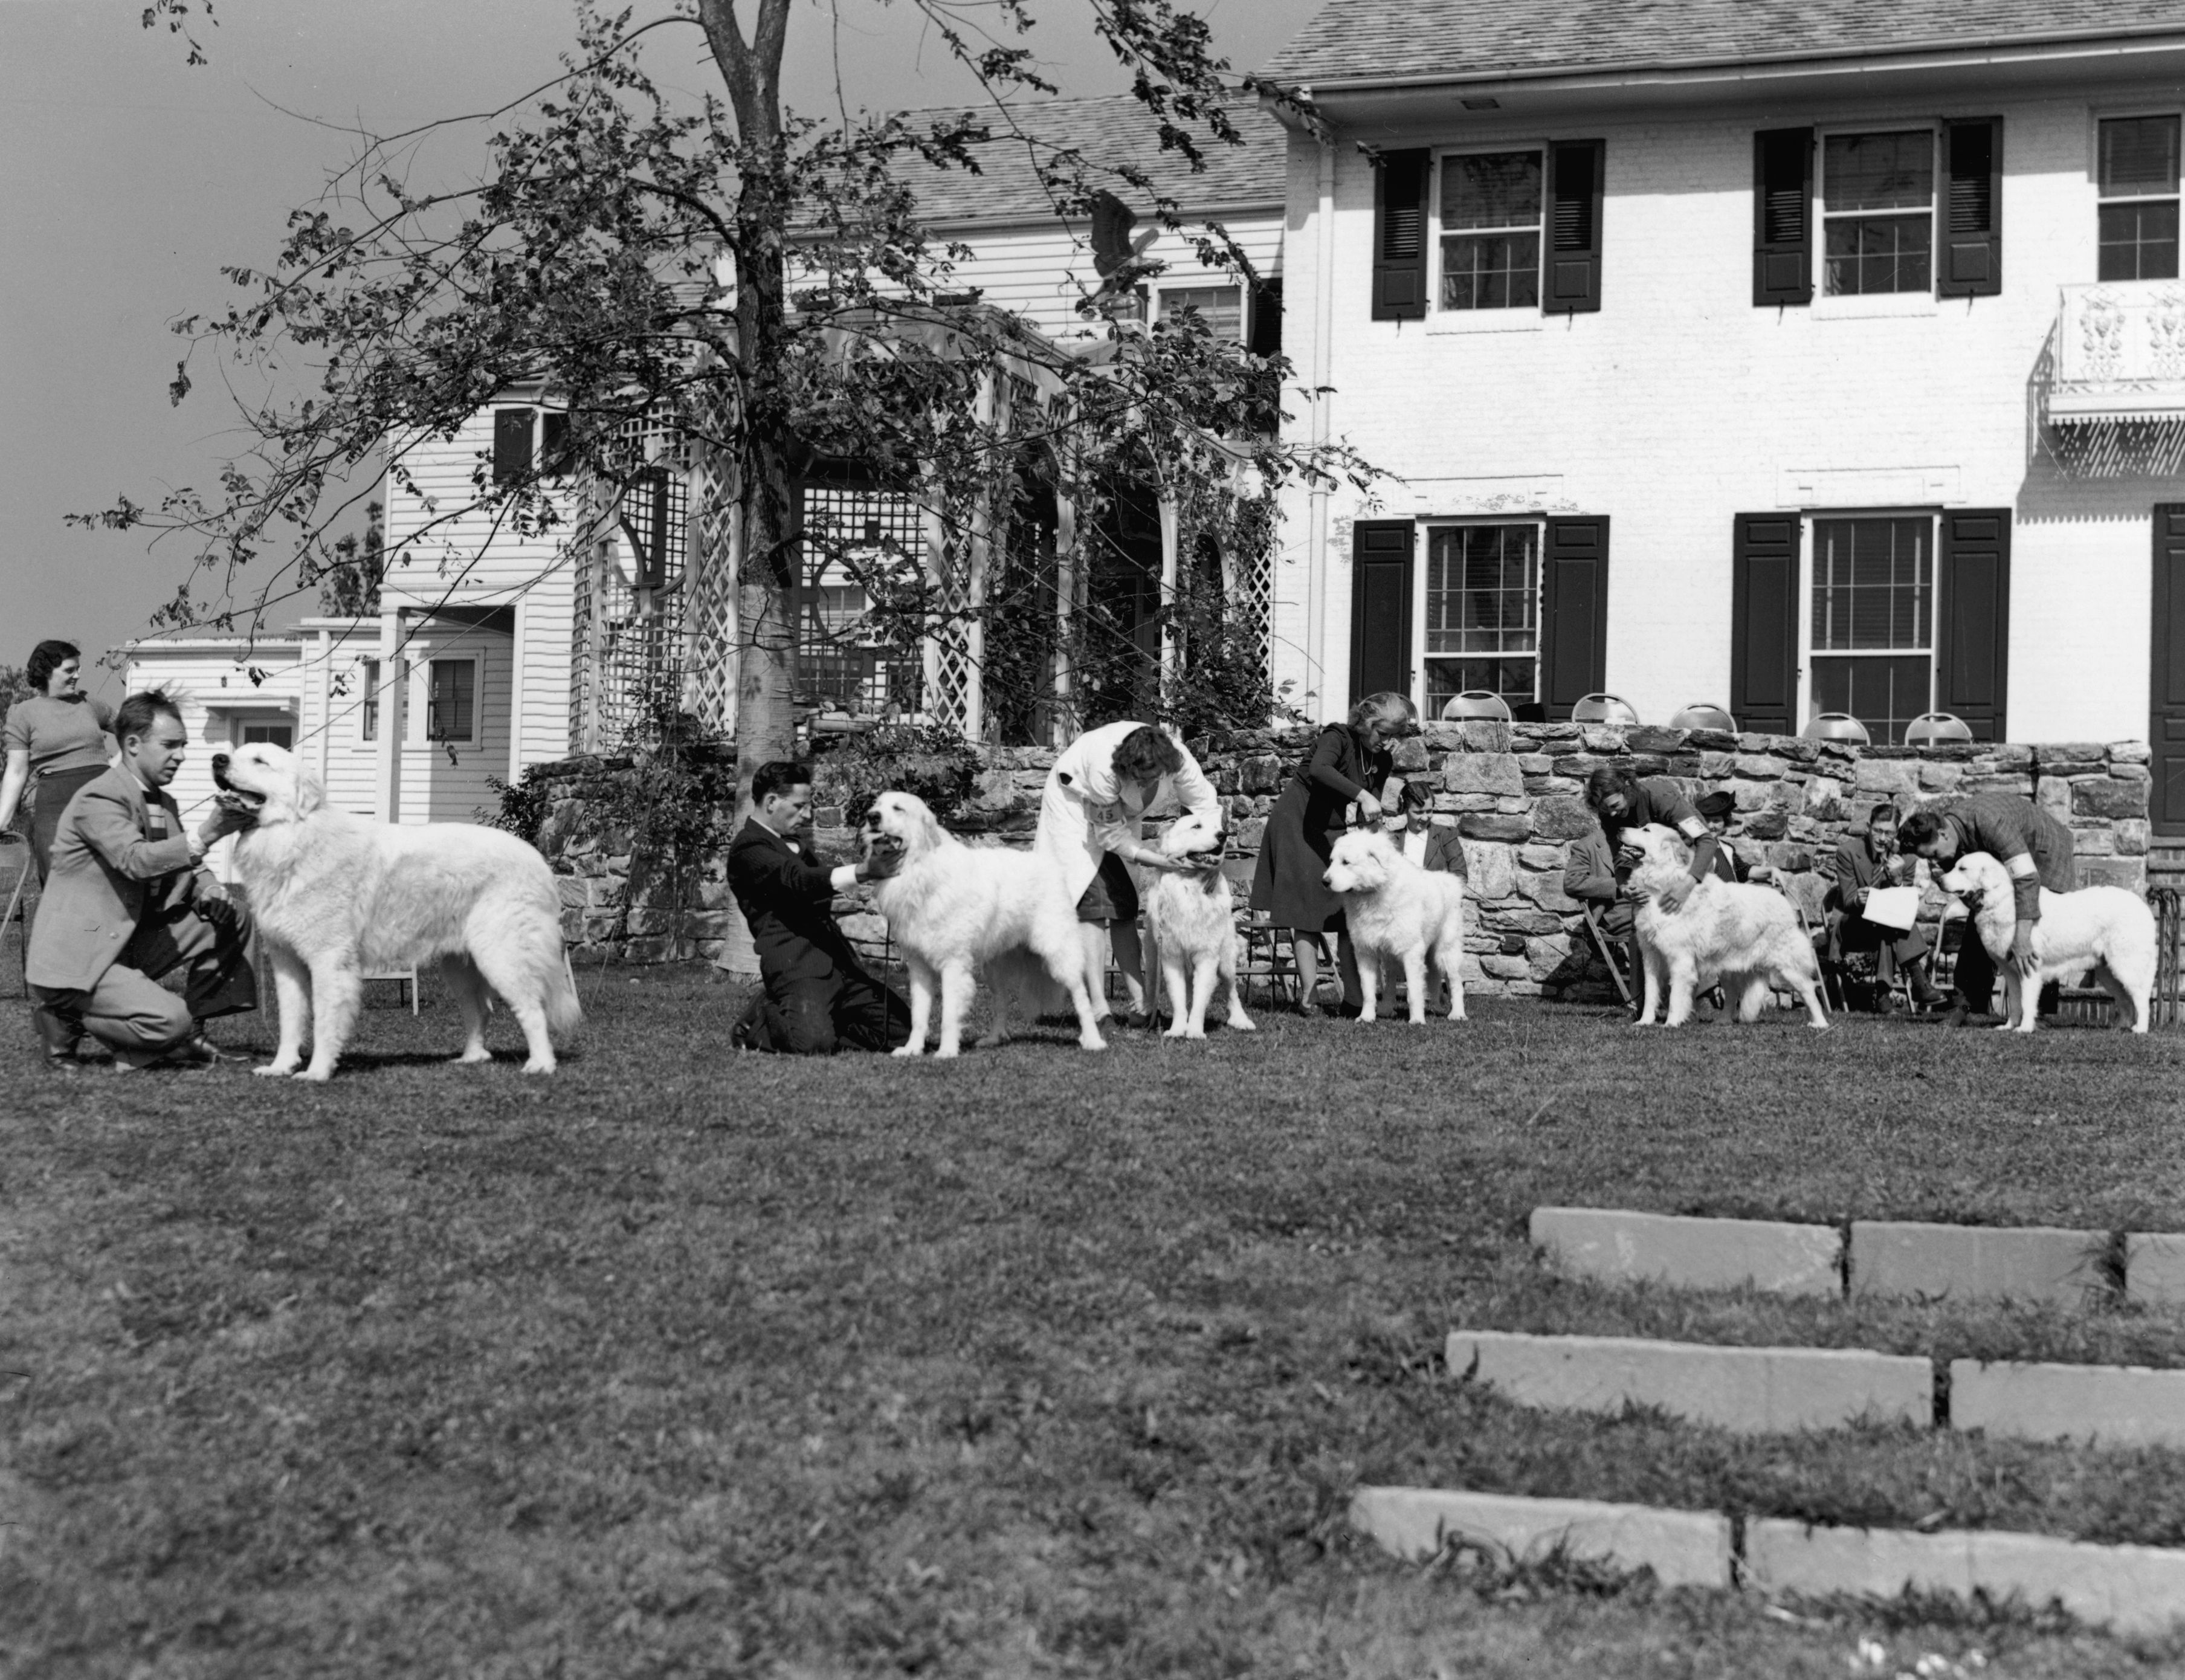 Specialty show sanctioned by the Great Pyrenees Club of America in 1940.